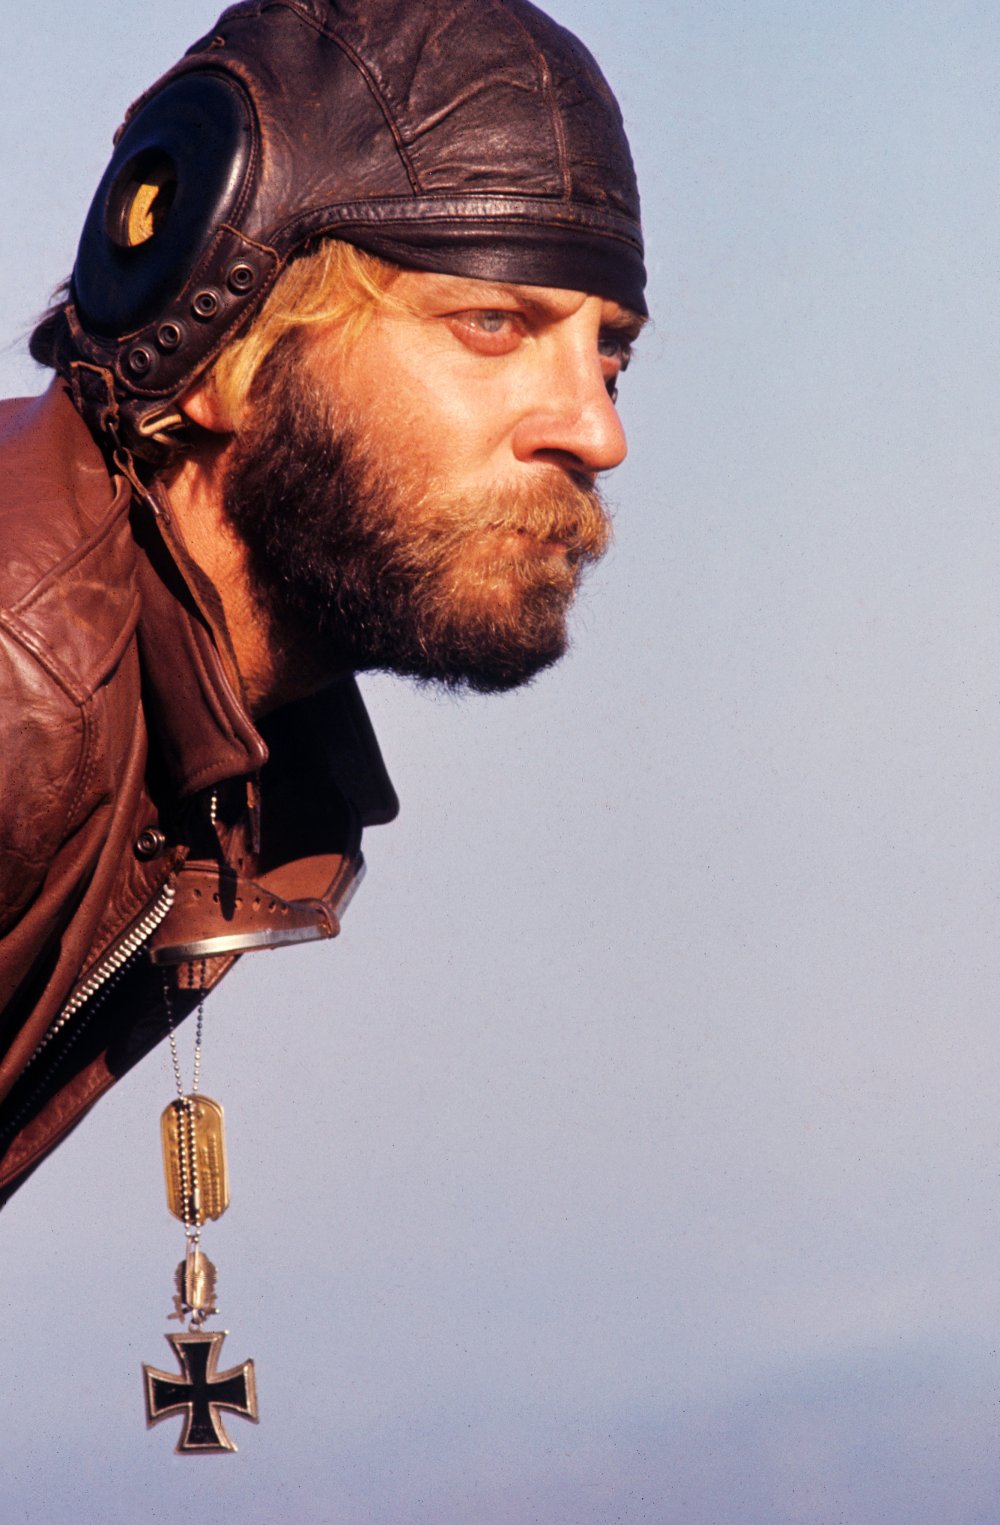 kelly-s-heroes-1970-001-donald-sutherland-00o-1t8.jpg